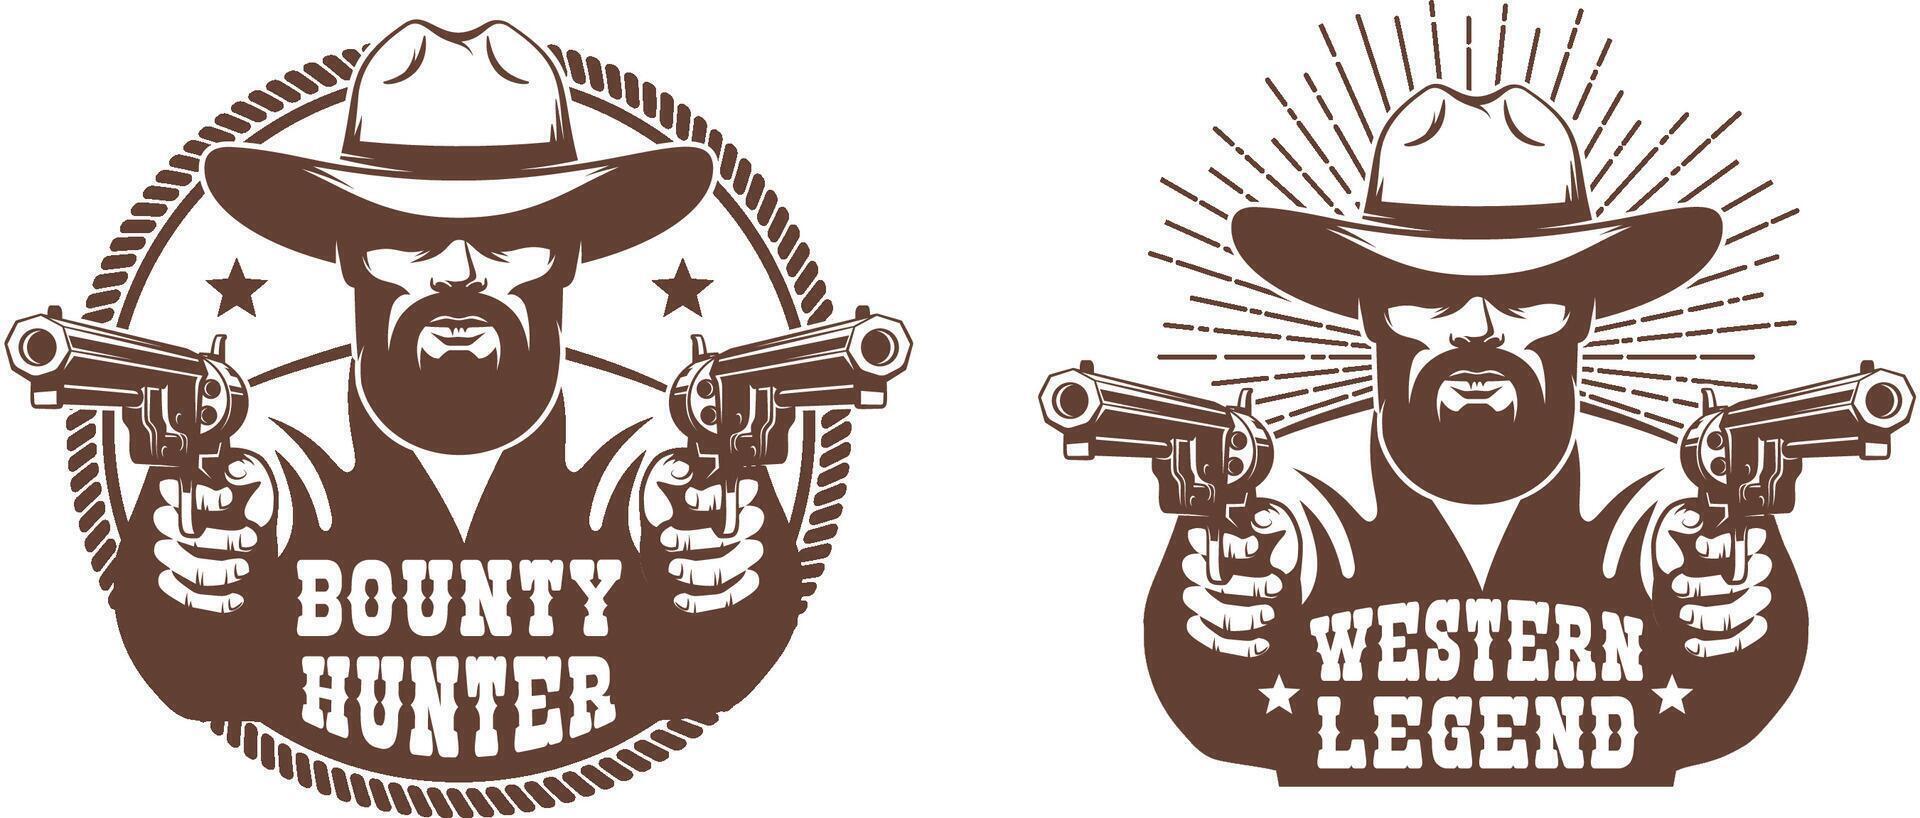 Western cowboy with beard and two guns - retro emblem vector